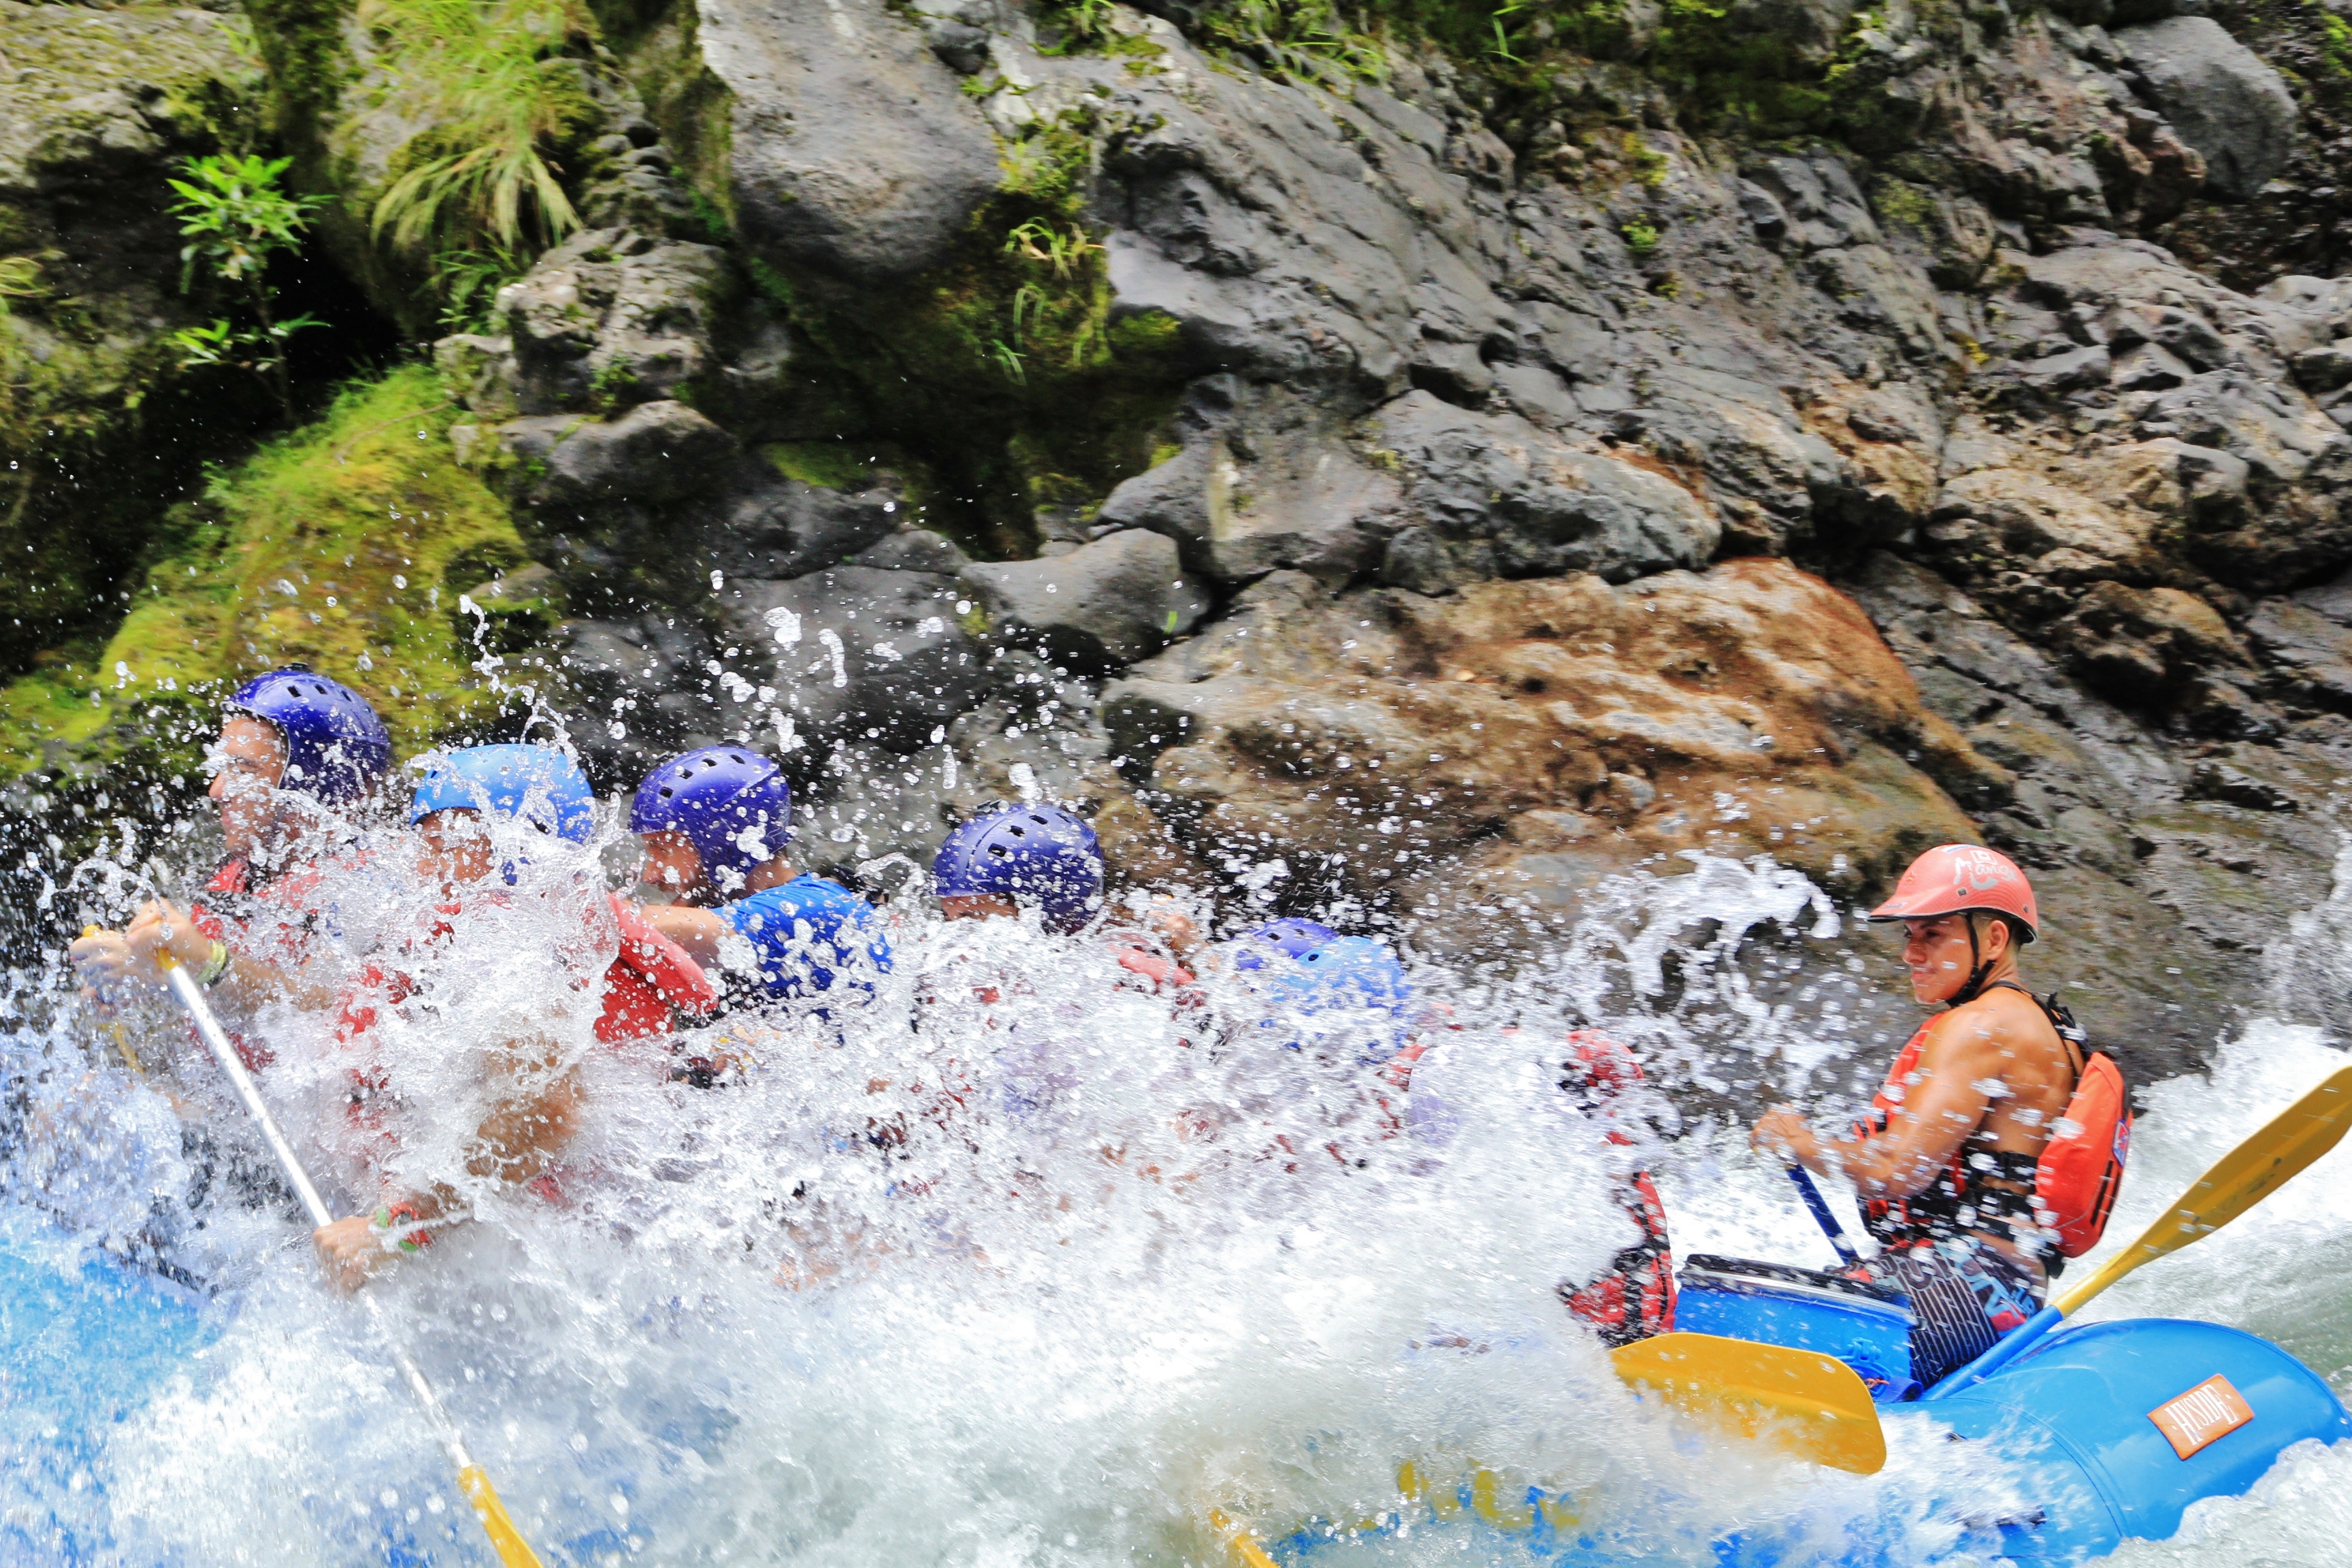 Your Costa Rica Rafting Tour Questions Answered!